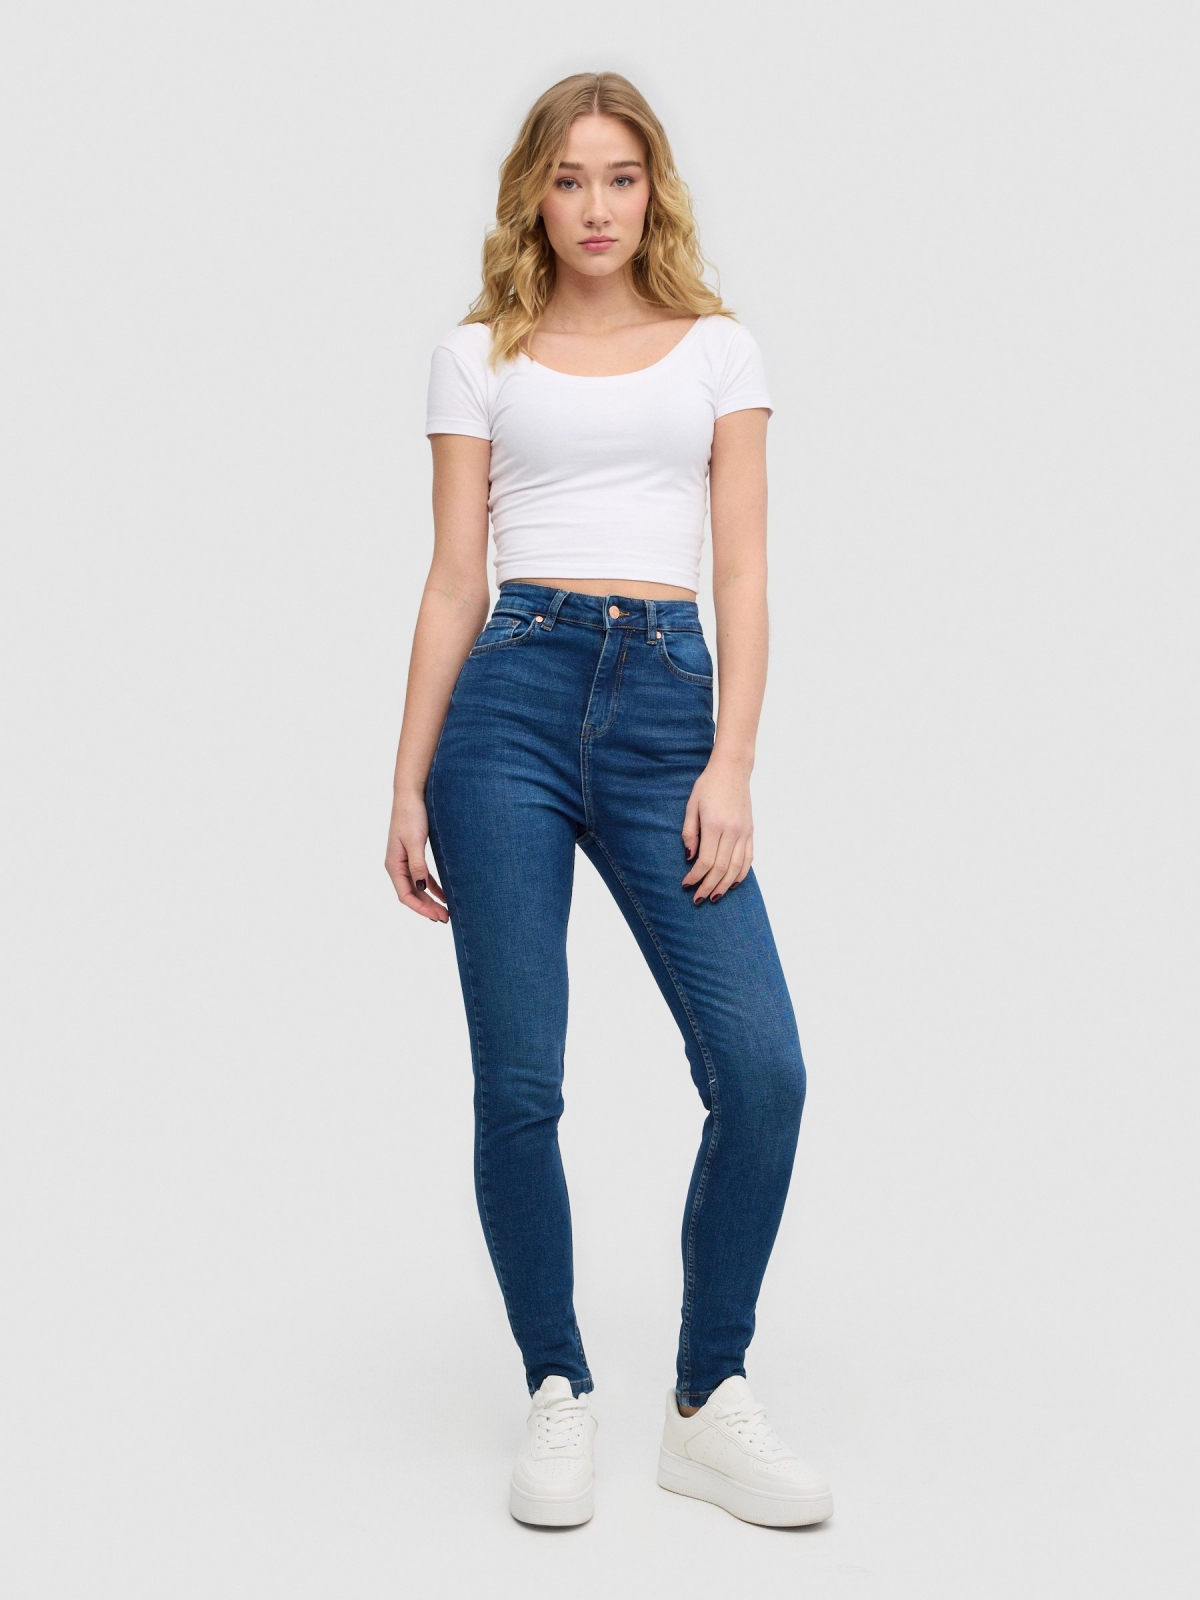 High rise skinny jeans blue front view